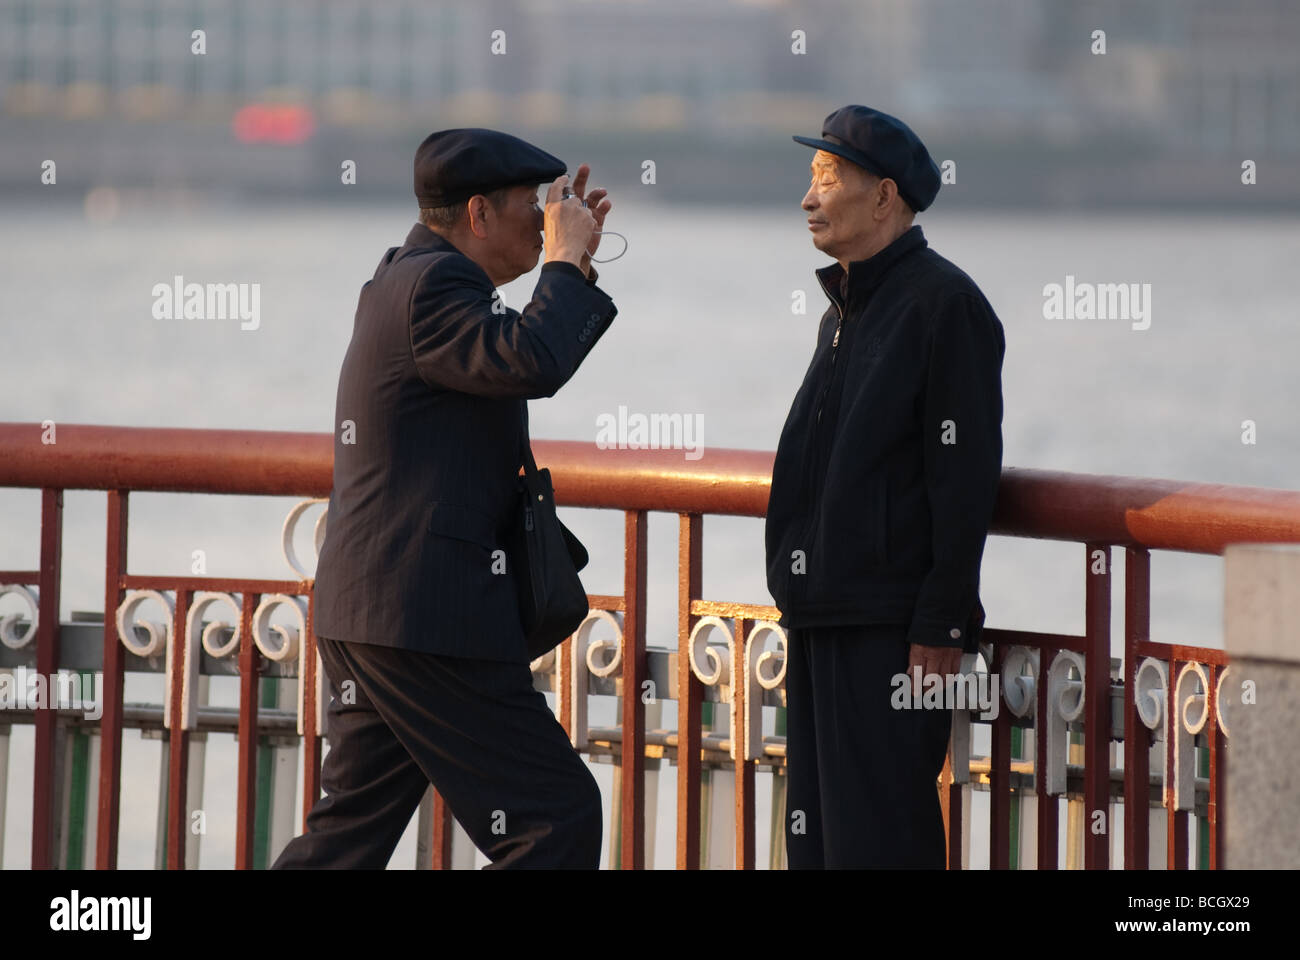 A man takes a picture at Bund Shanghai China Stock Photo